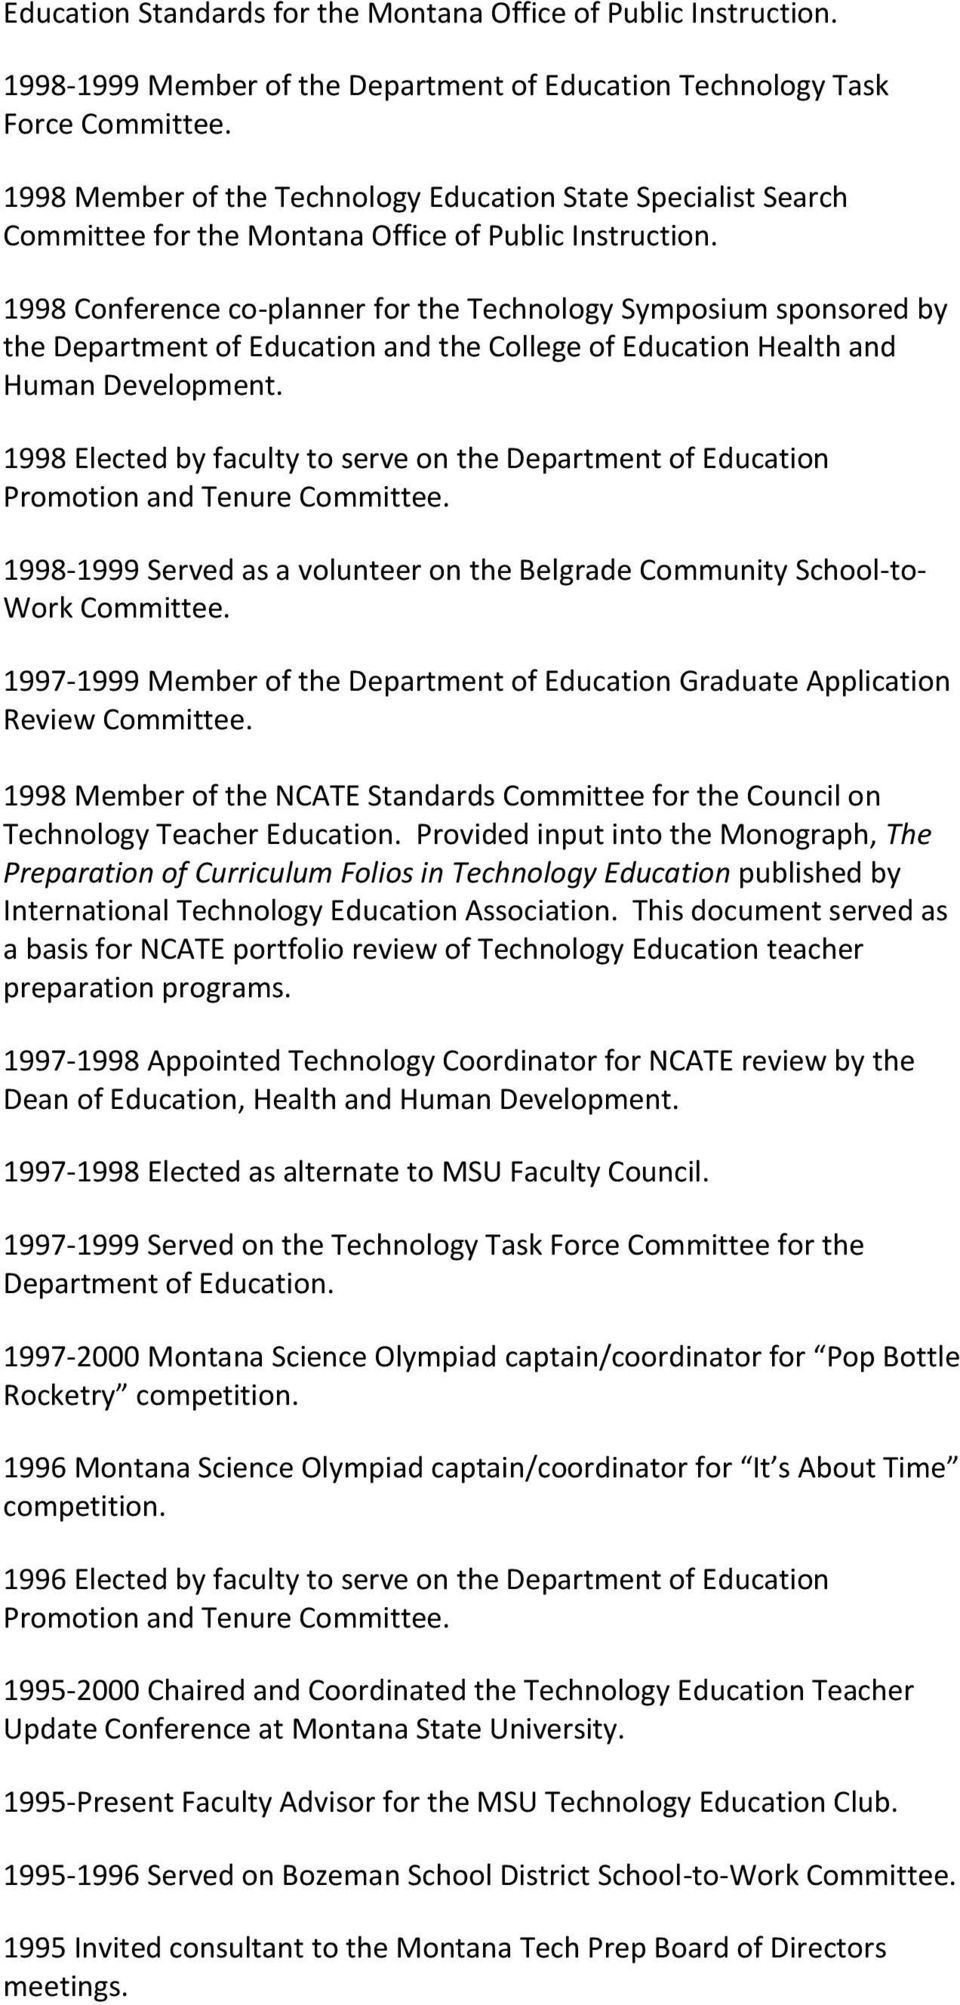 1998 Conference co-planner for the Technology Symposium sponsored by the Department of Education and the College of Education Health and Human Development.